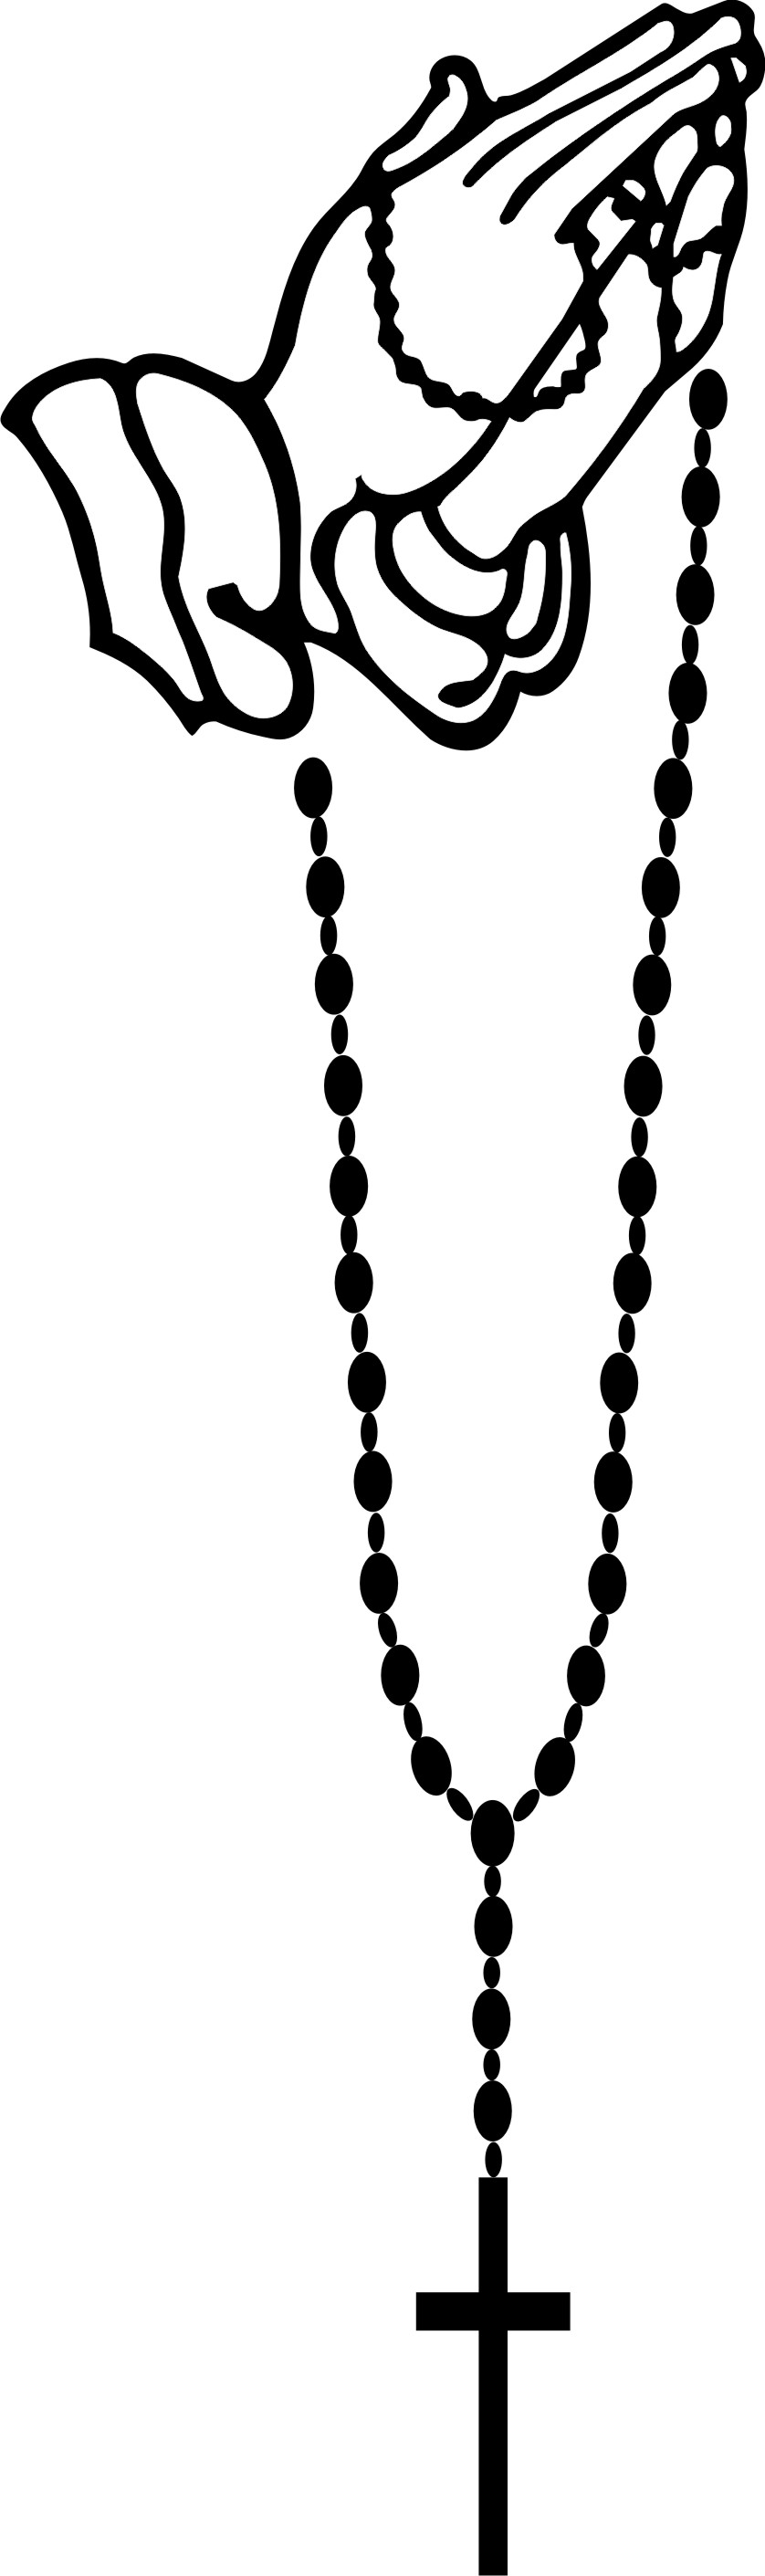 rosary clipart free download - photo #5